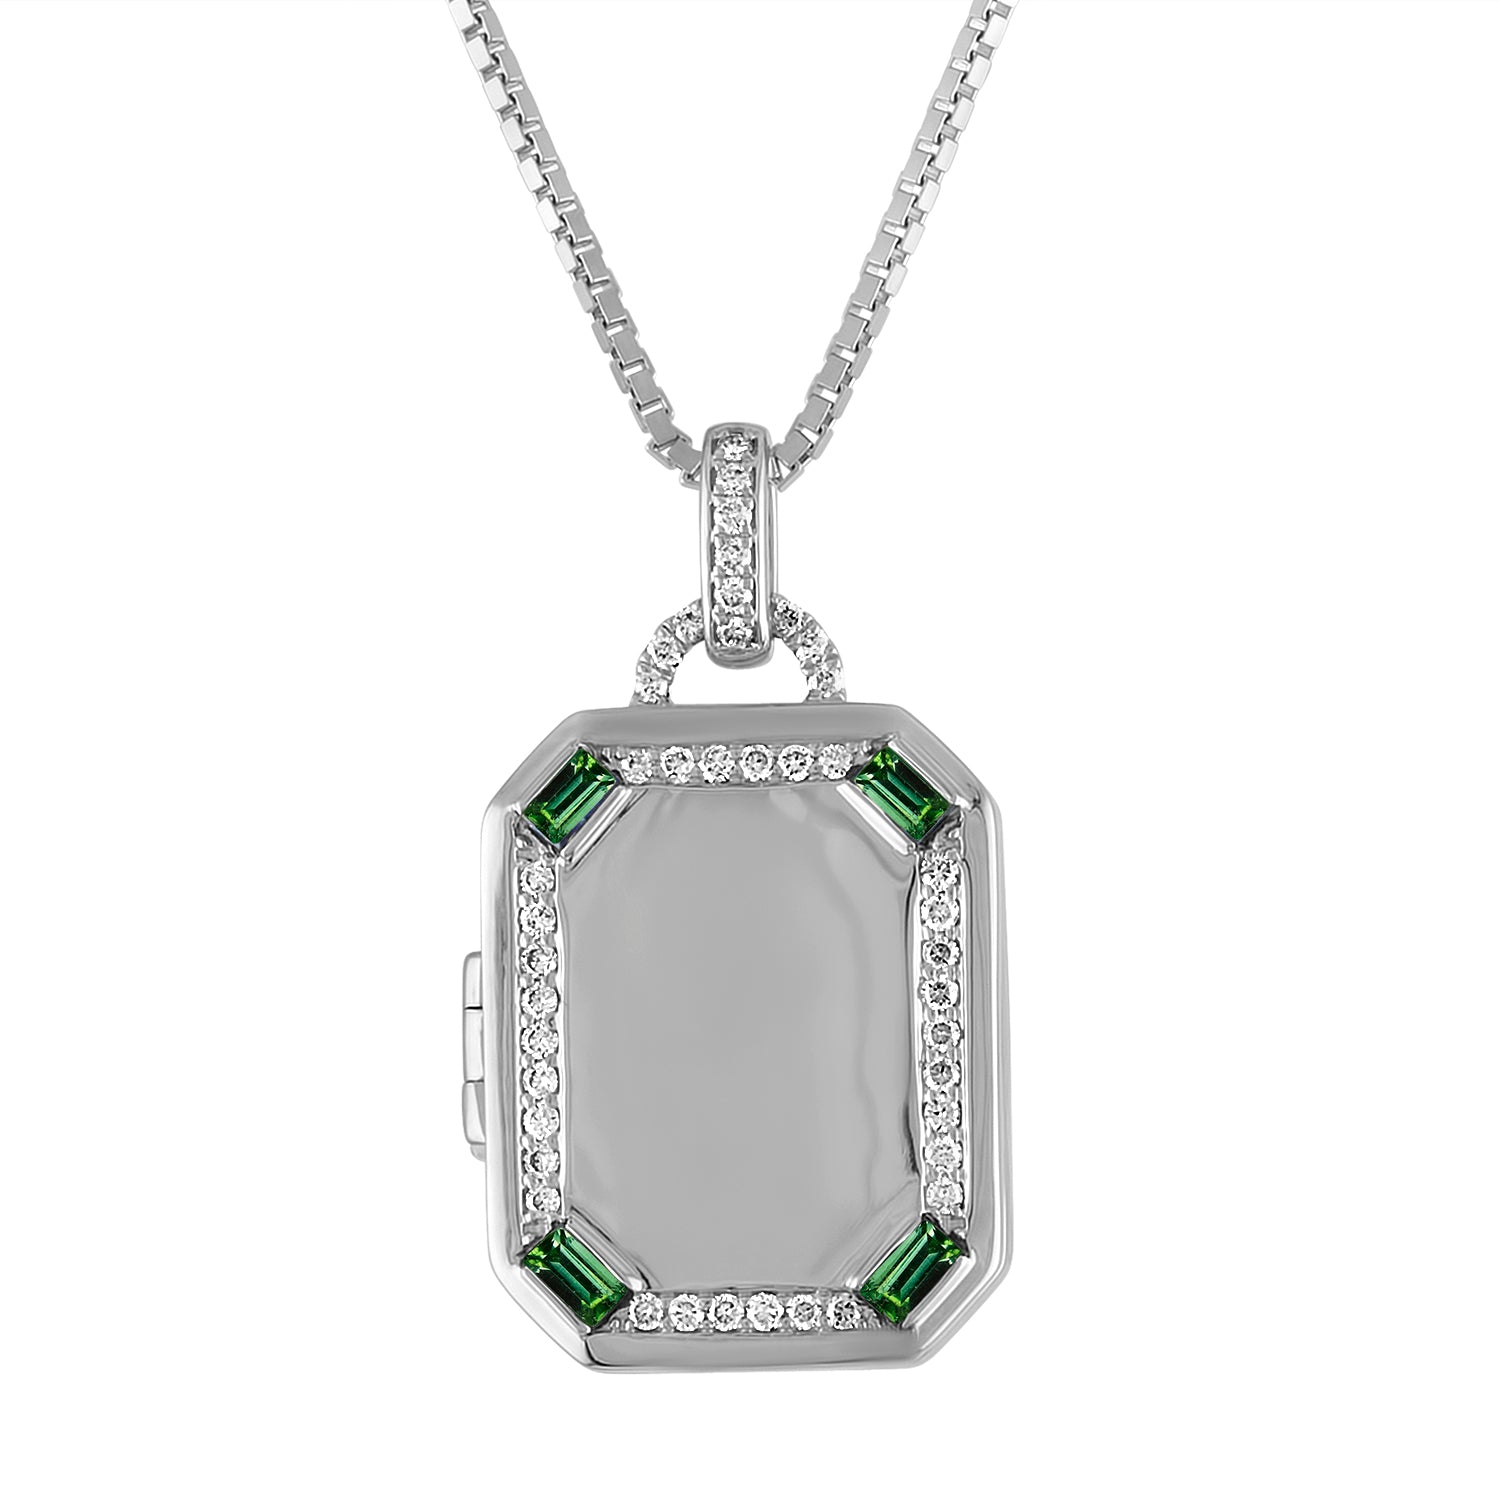 White gold rectangle locket with emerald baguettes and round diamonds.